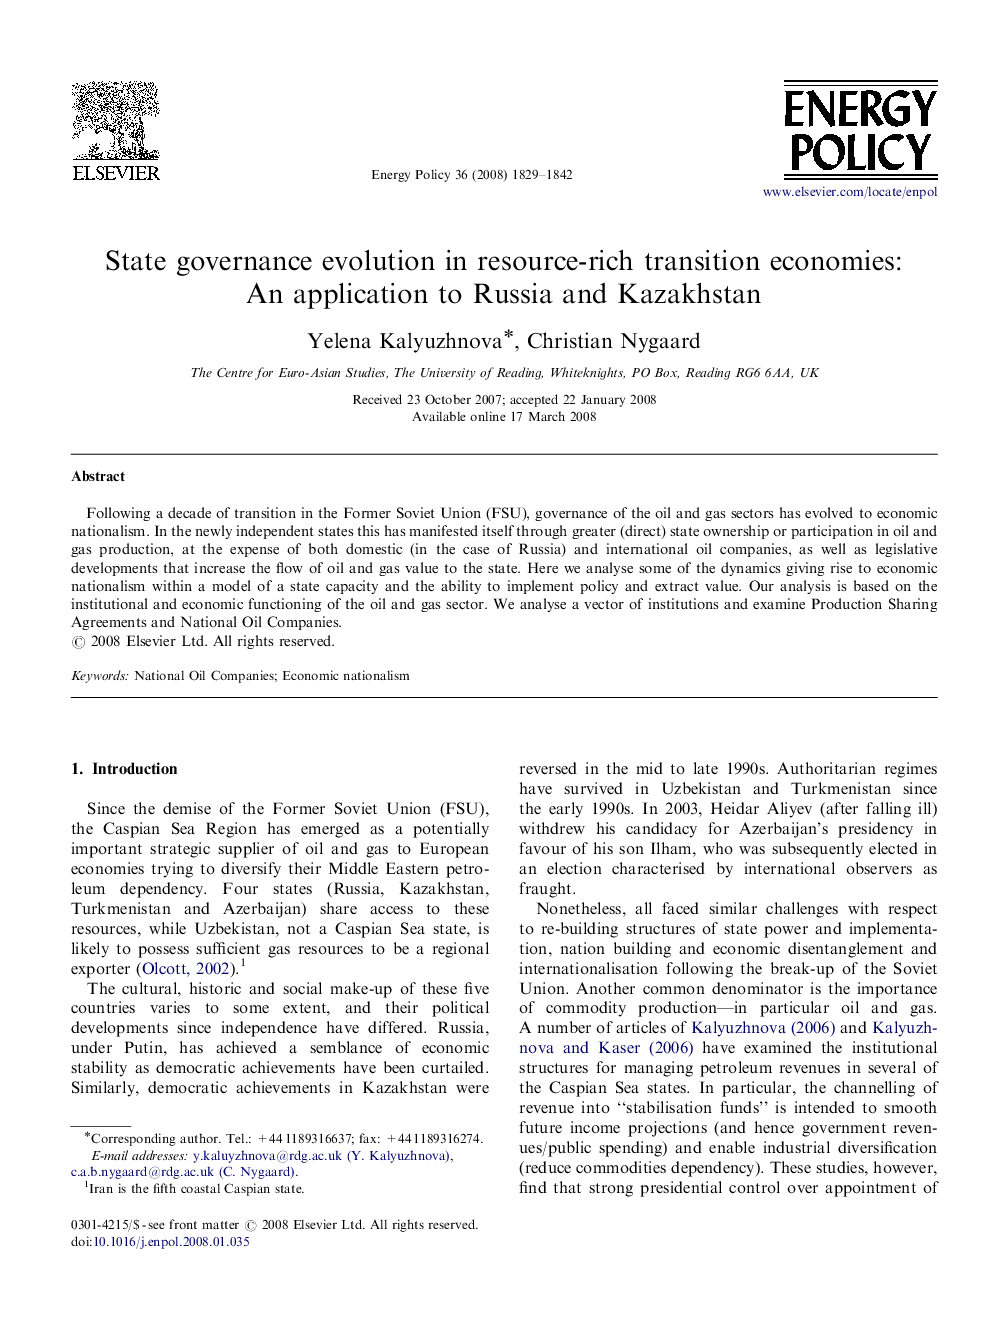 State governance evolution in resource-rich transition economies: An application to Russia and Kazakhstan